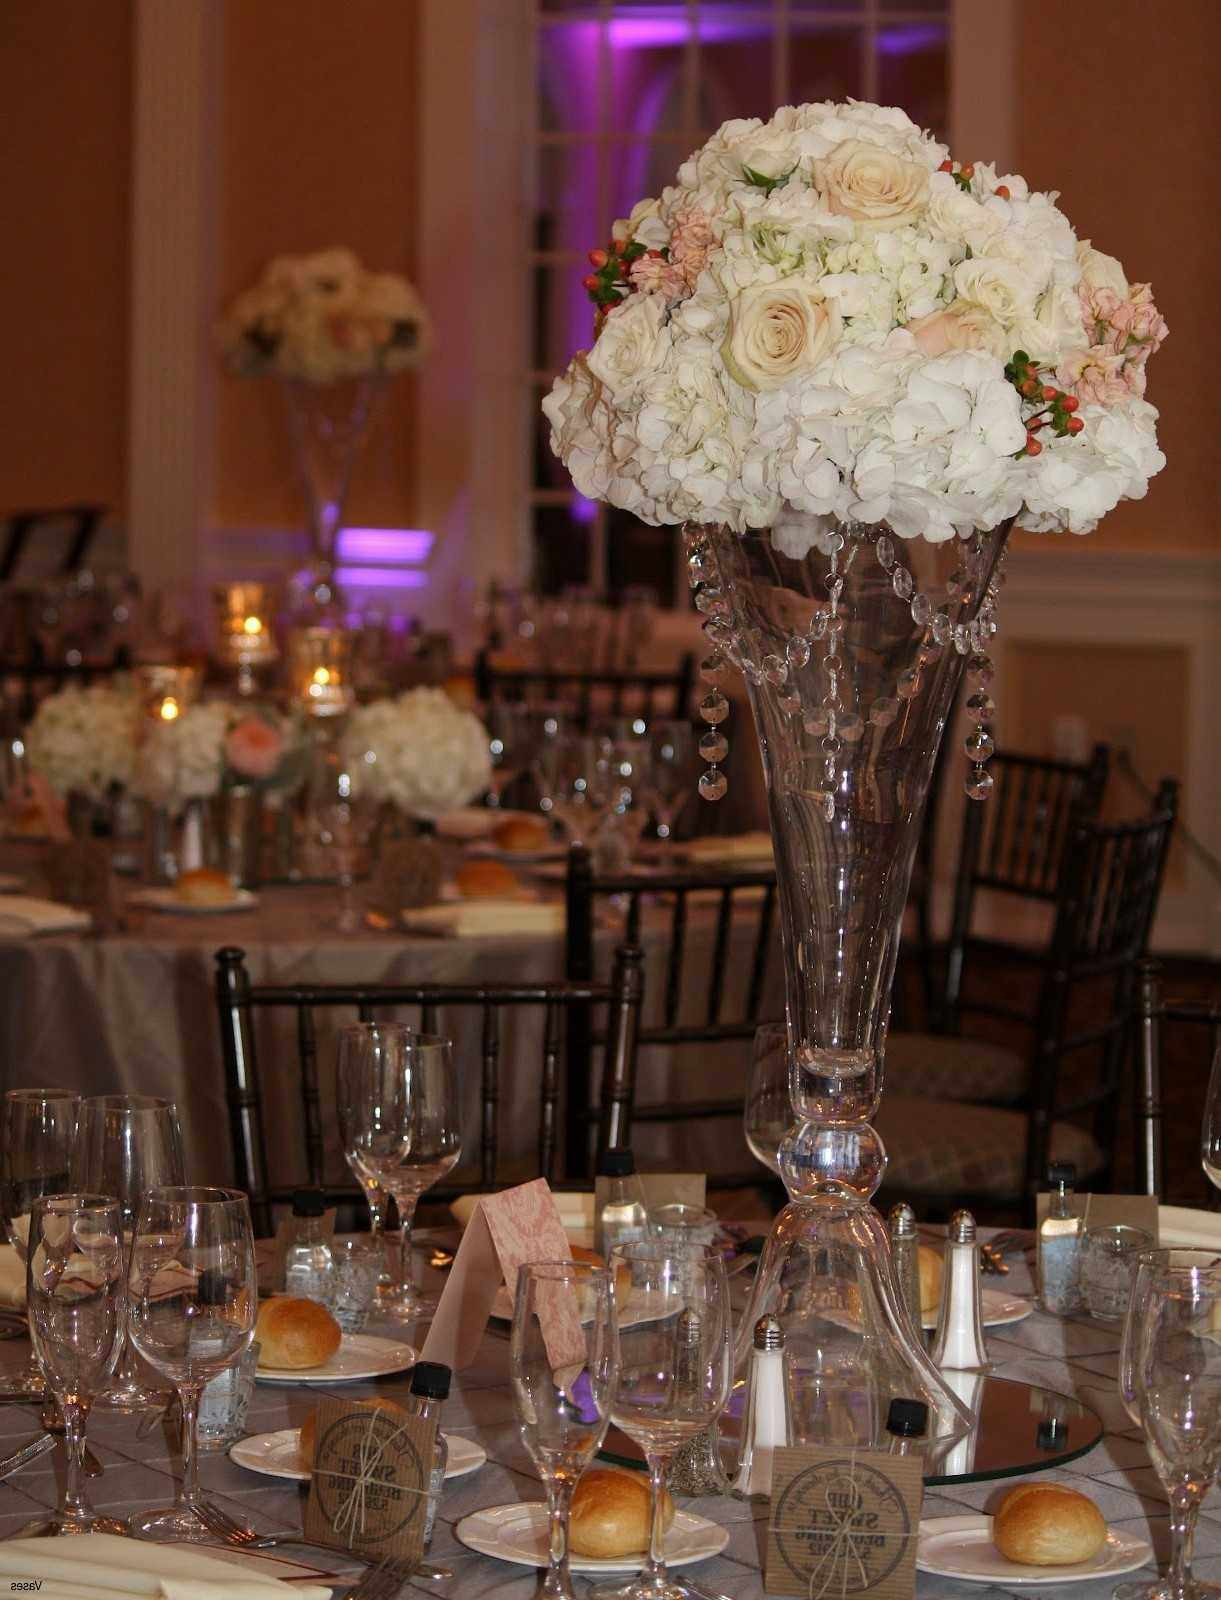 24 Amazing Tall Glass Vase Centerpiece Ideas 2023 free download tall glass vase centerpiece ideas of 60 fresh cheap wedding decorations for tables a anna wedding throughout 60 fresh cheap wedding decorations for tables vases wedding centerpiece cheap tal